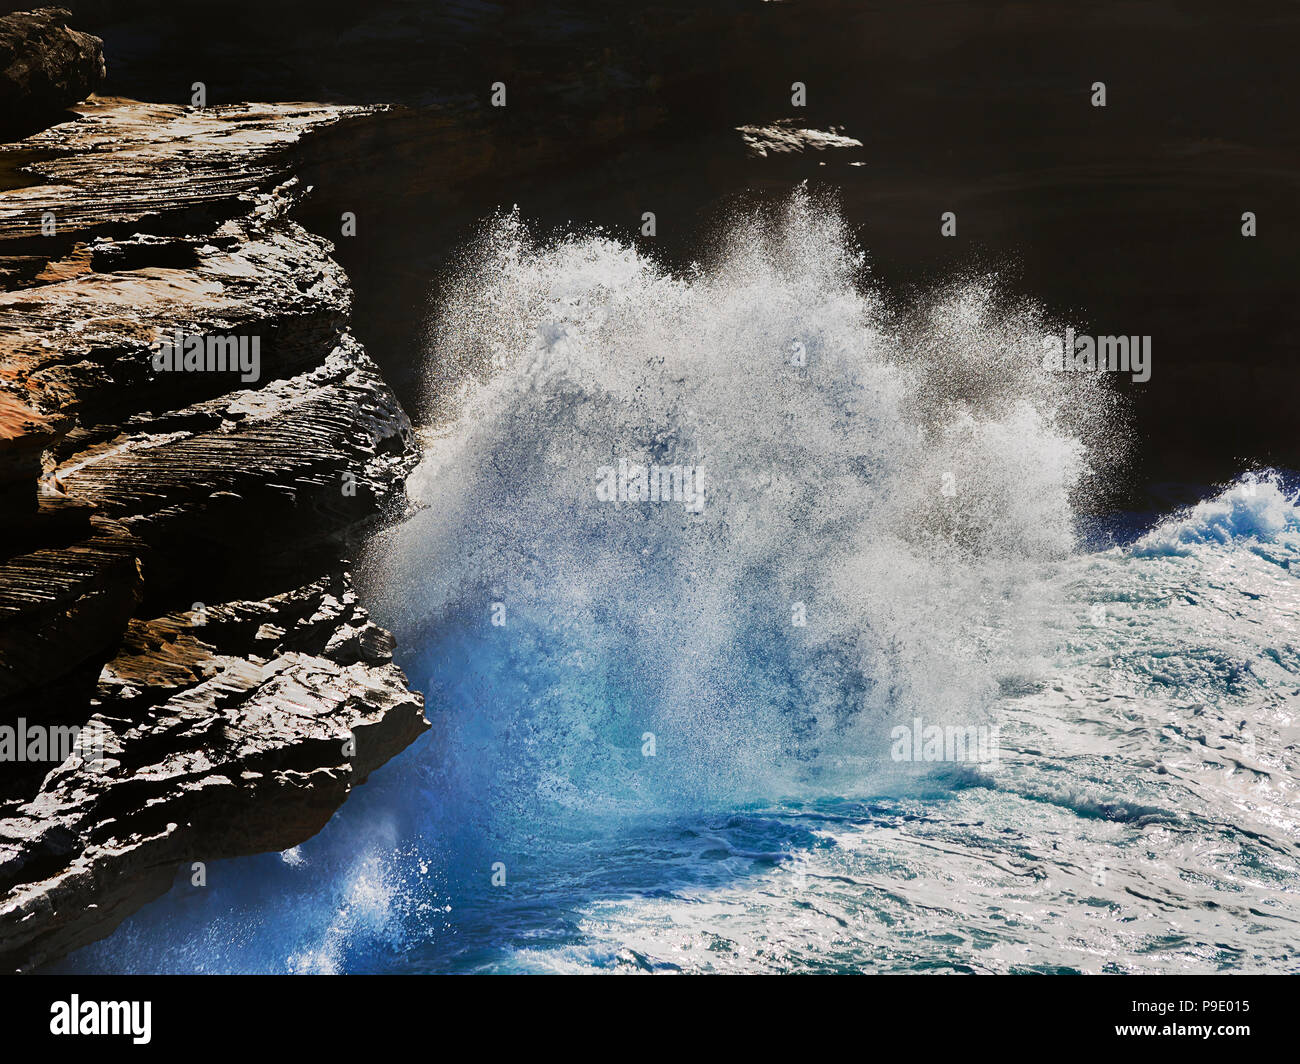 Mightly powerful wave hits sandstone cliffs of Cape Solander coast of Sydney facing Pacific ocean in endless undermining of coast. Stock Photo